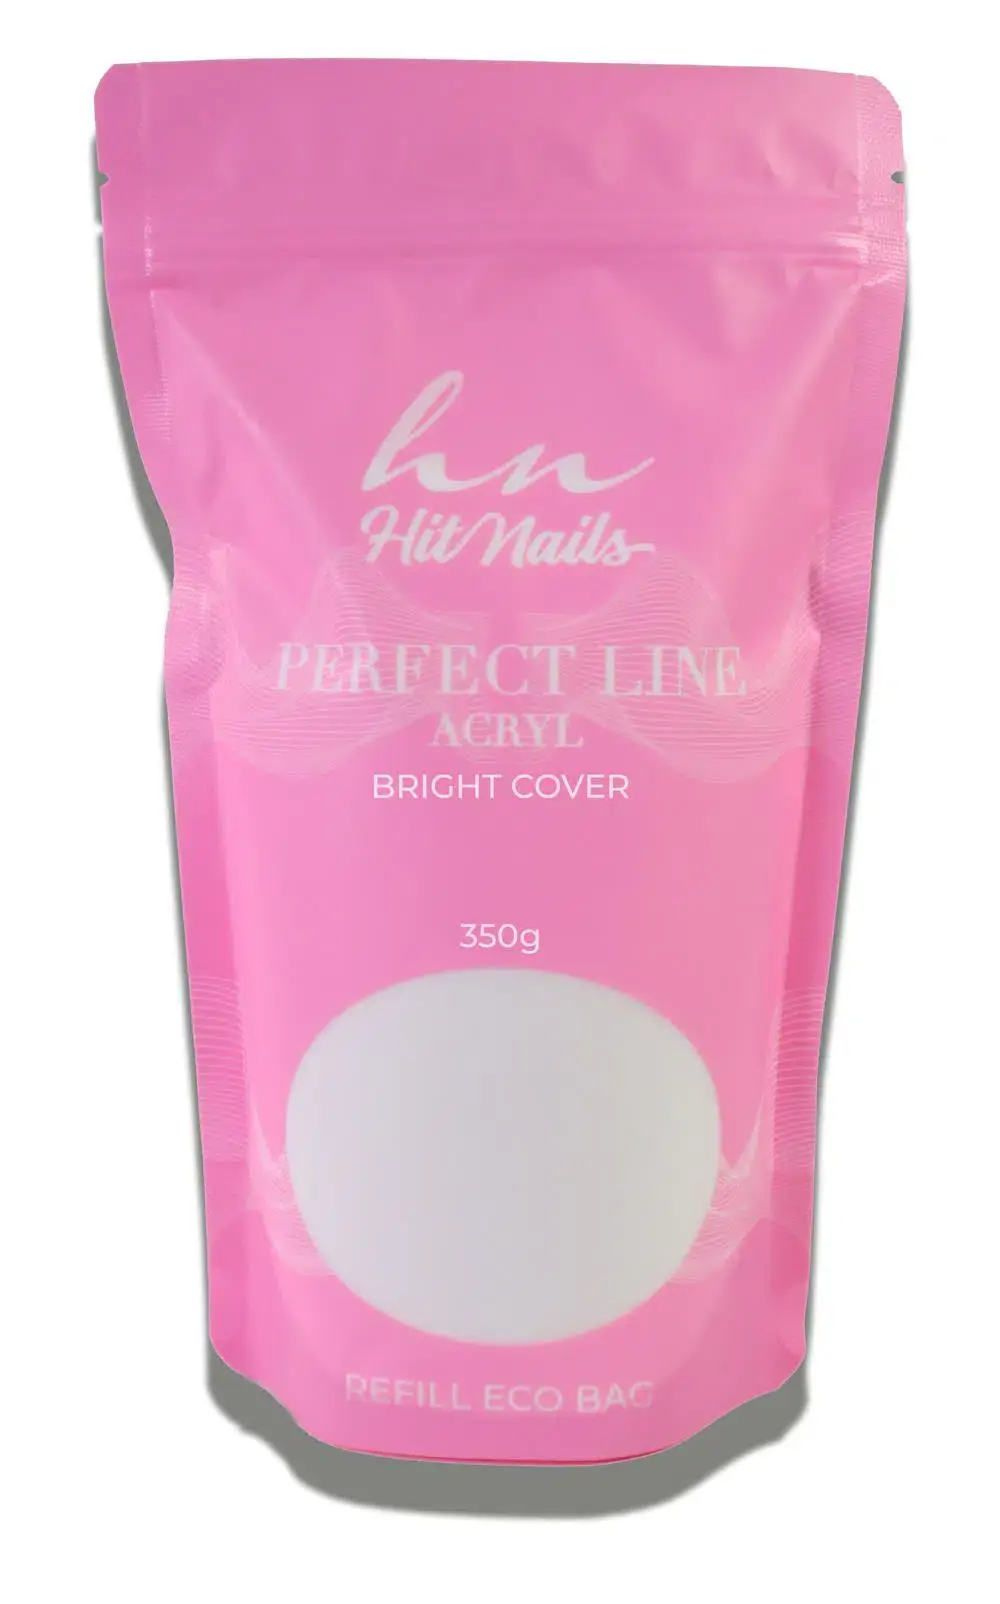 Perfect Line - Acryl - Bright Cover 350g Refill